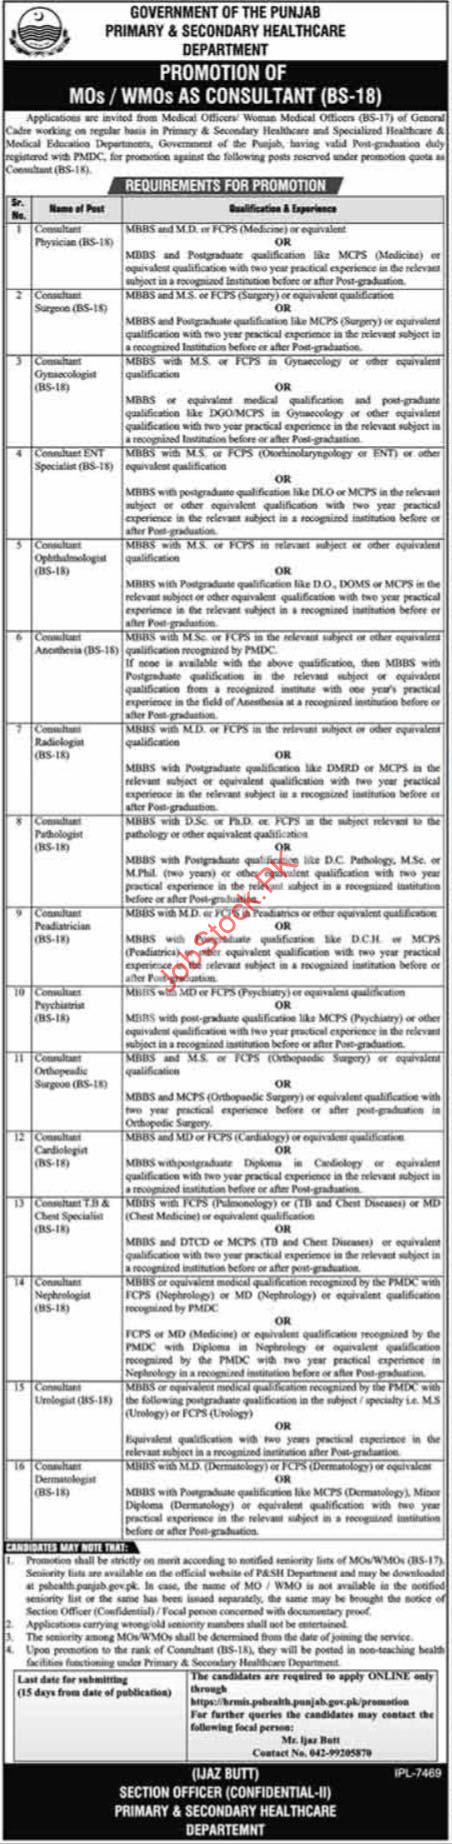 Primary & Secondary Healthcare Department Lahore Jobs 2020